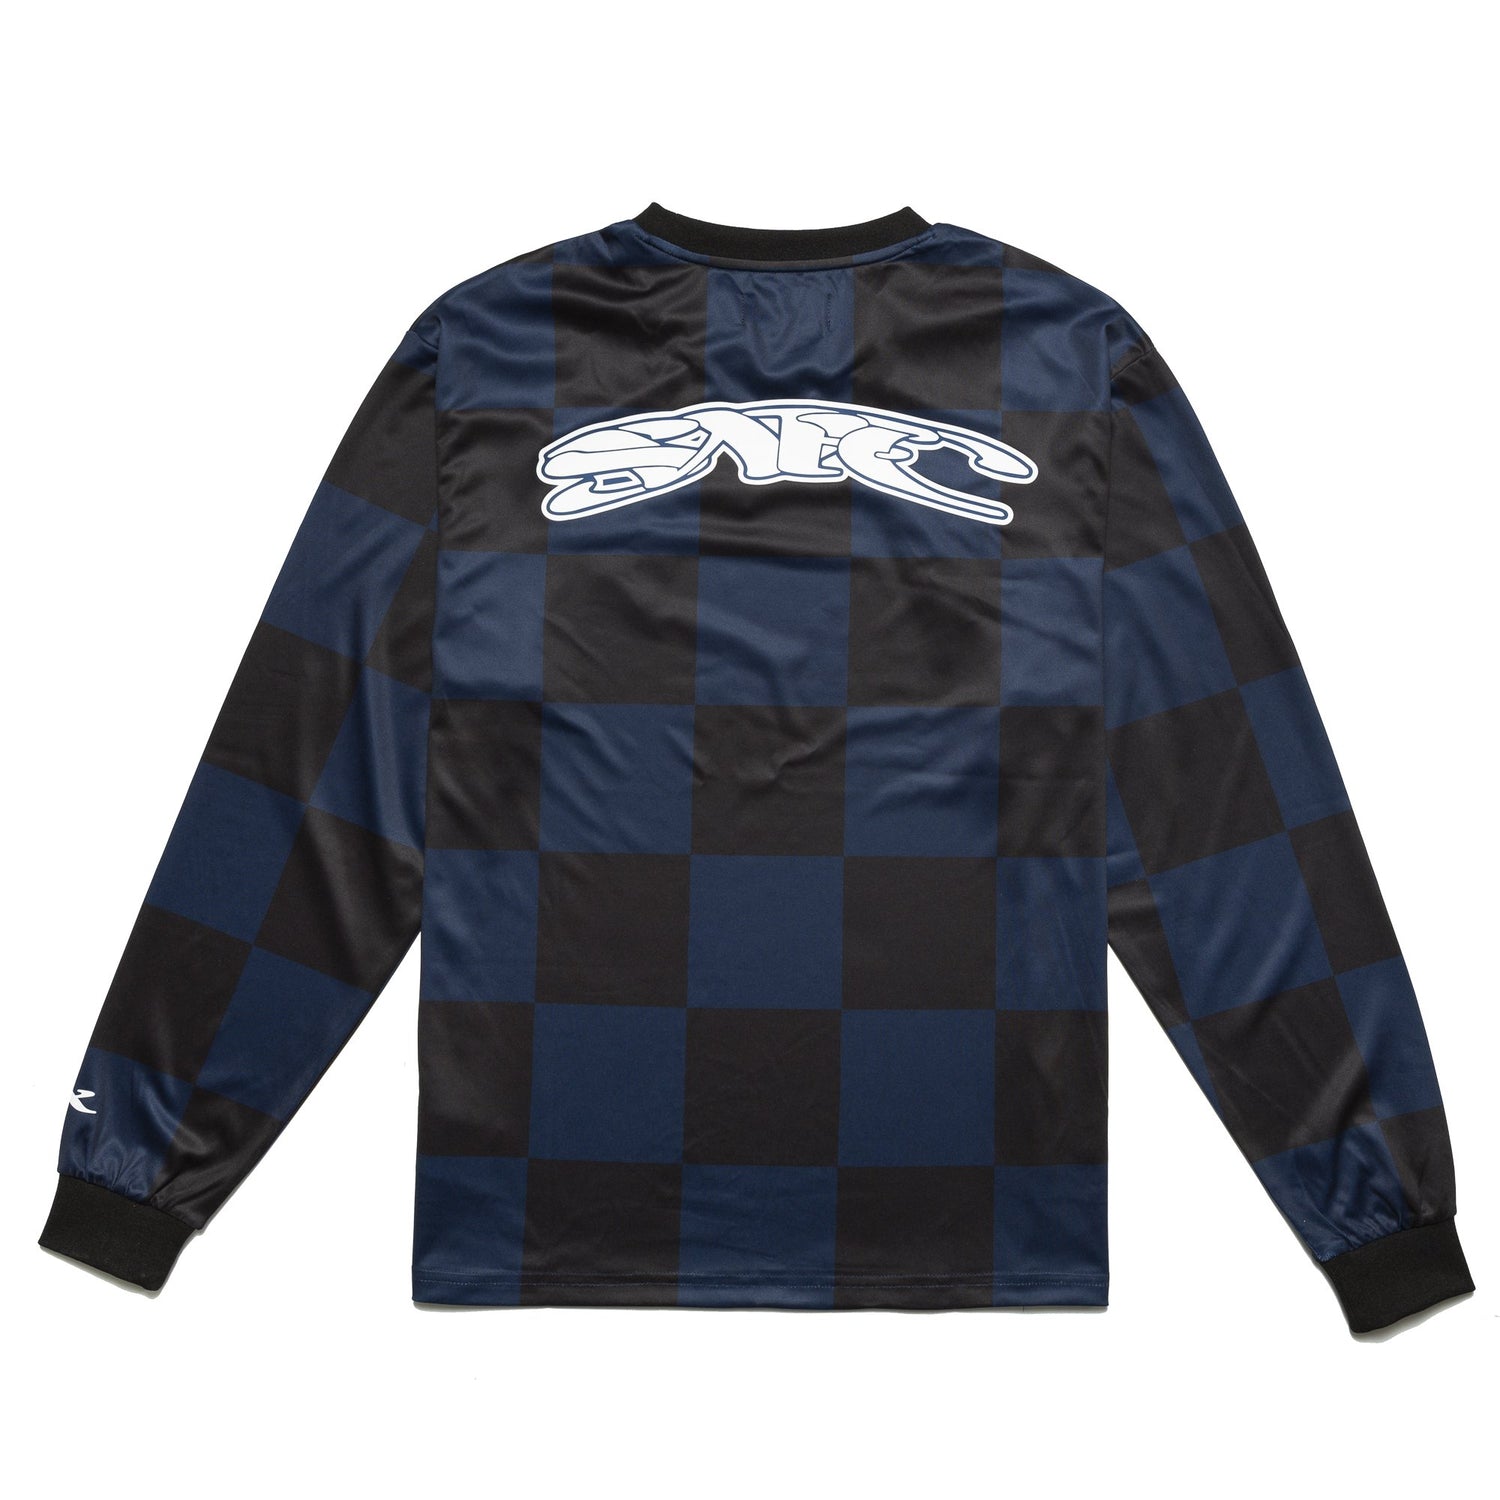 Chrystie NYC x Soho Warriors - SWFC 10th Anniversary Soccer Jersey / Away Color